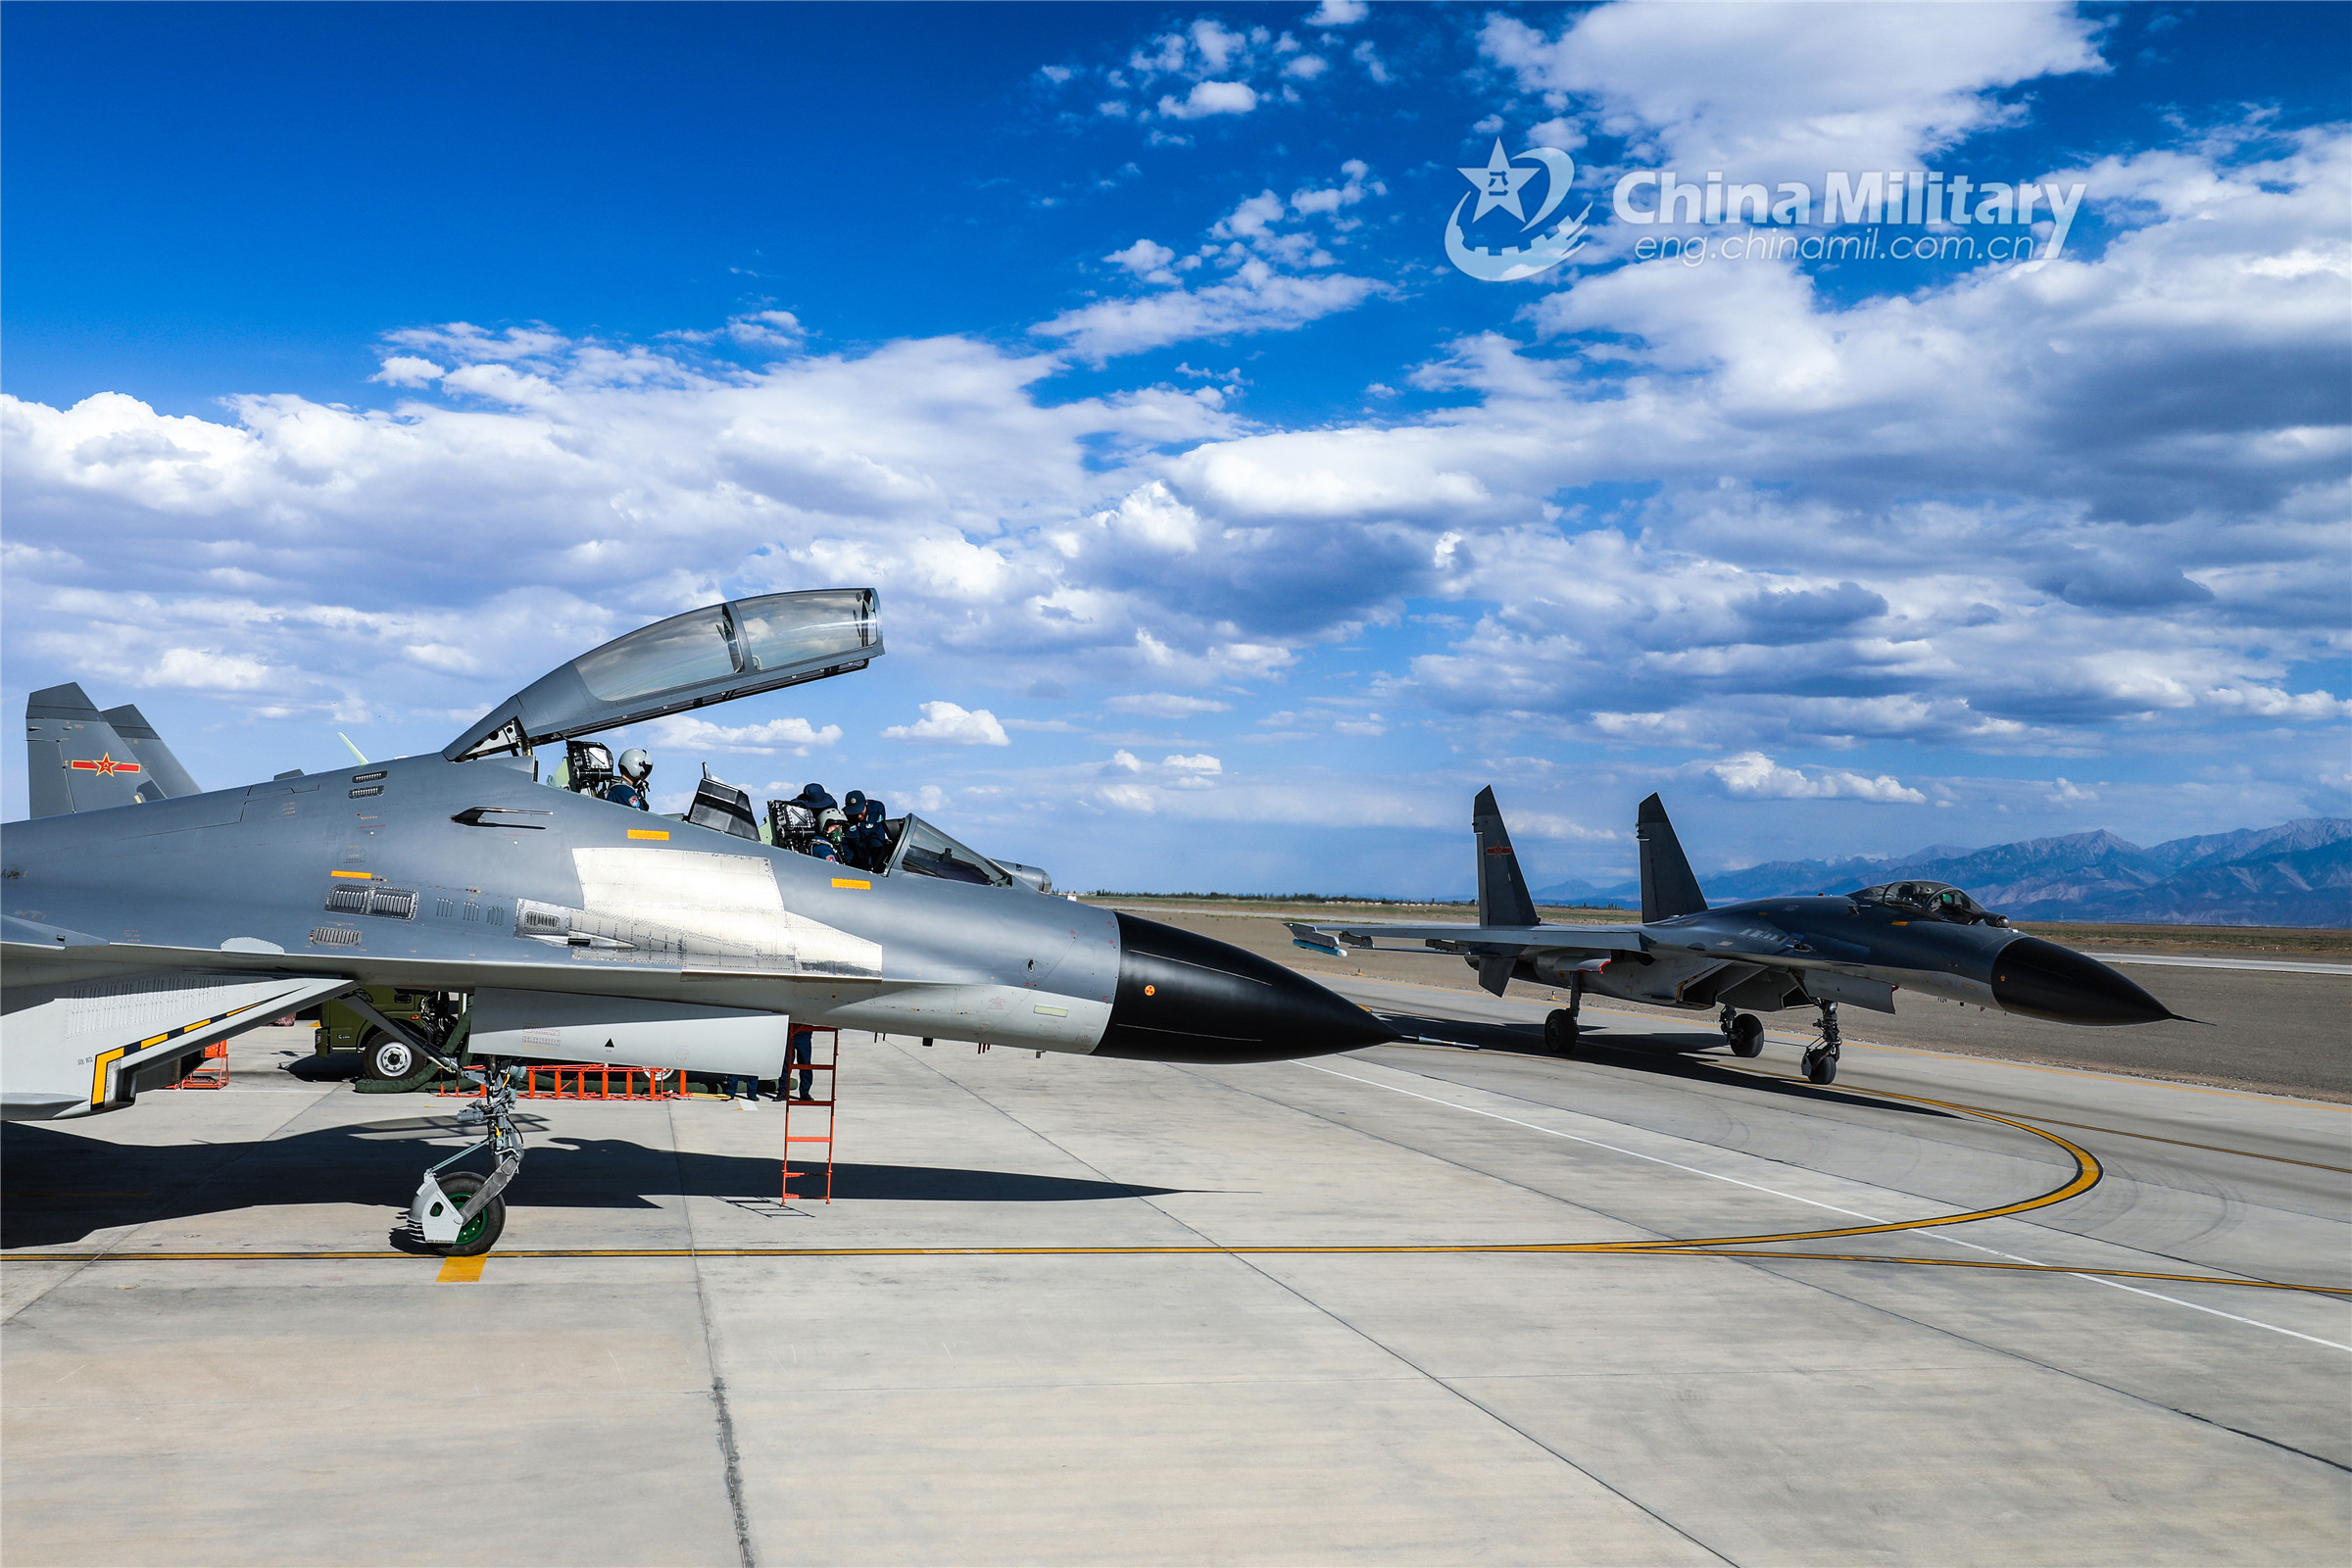 General 2400x1600 China aircraft clouds J-16 PLAAF jet fighter Chinese Army military military aircraft watermarked